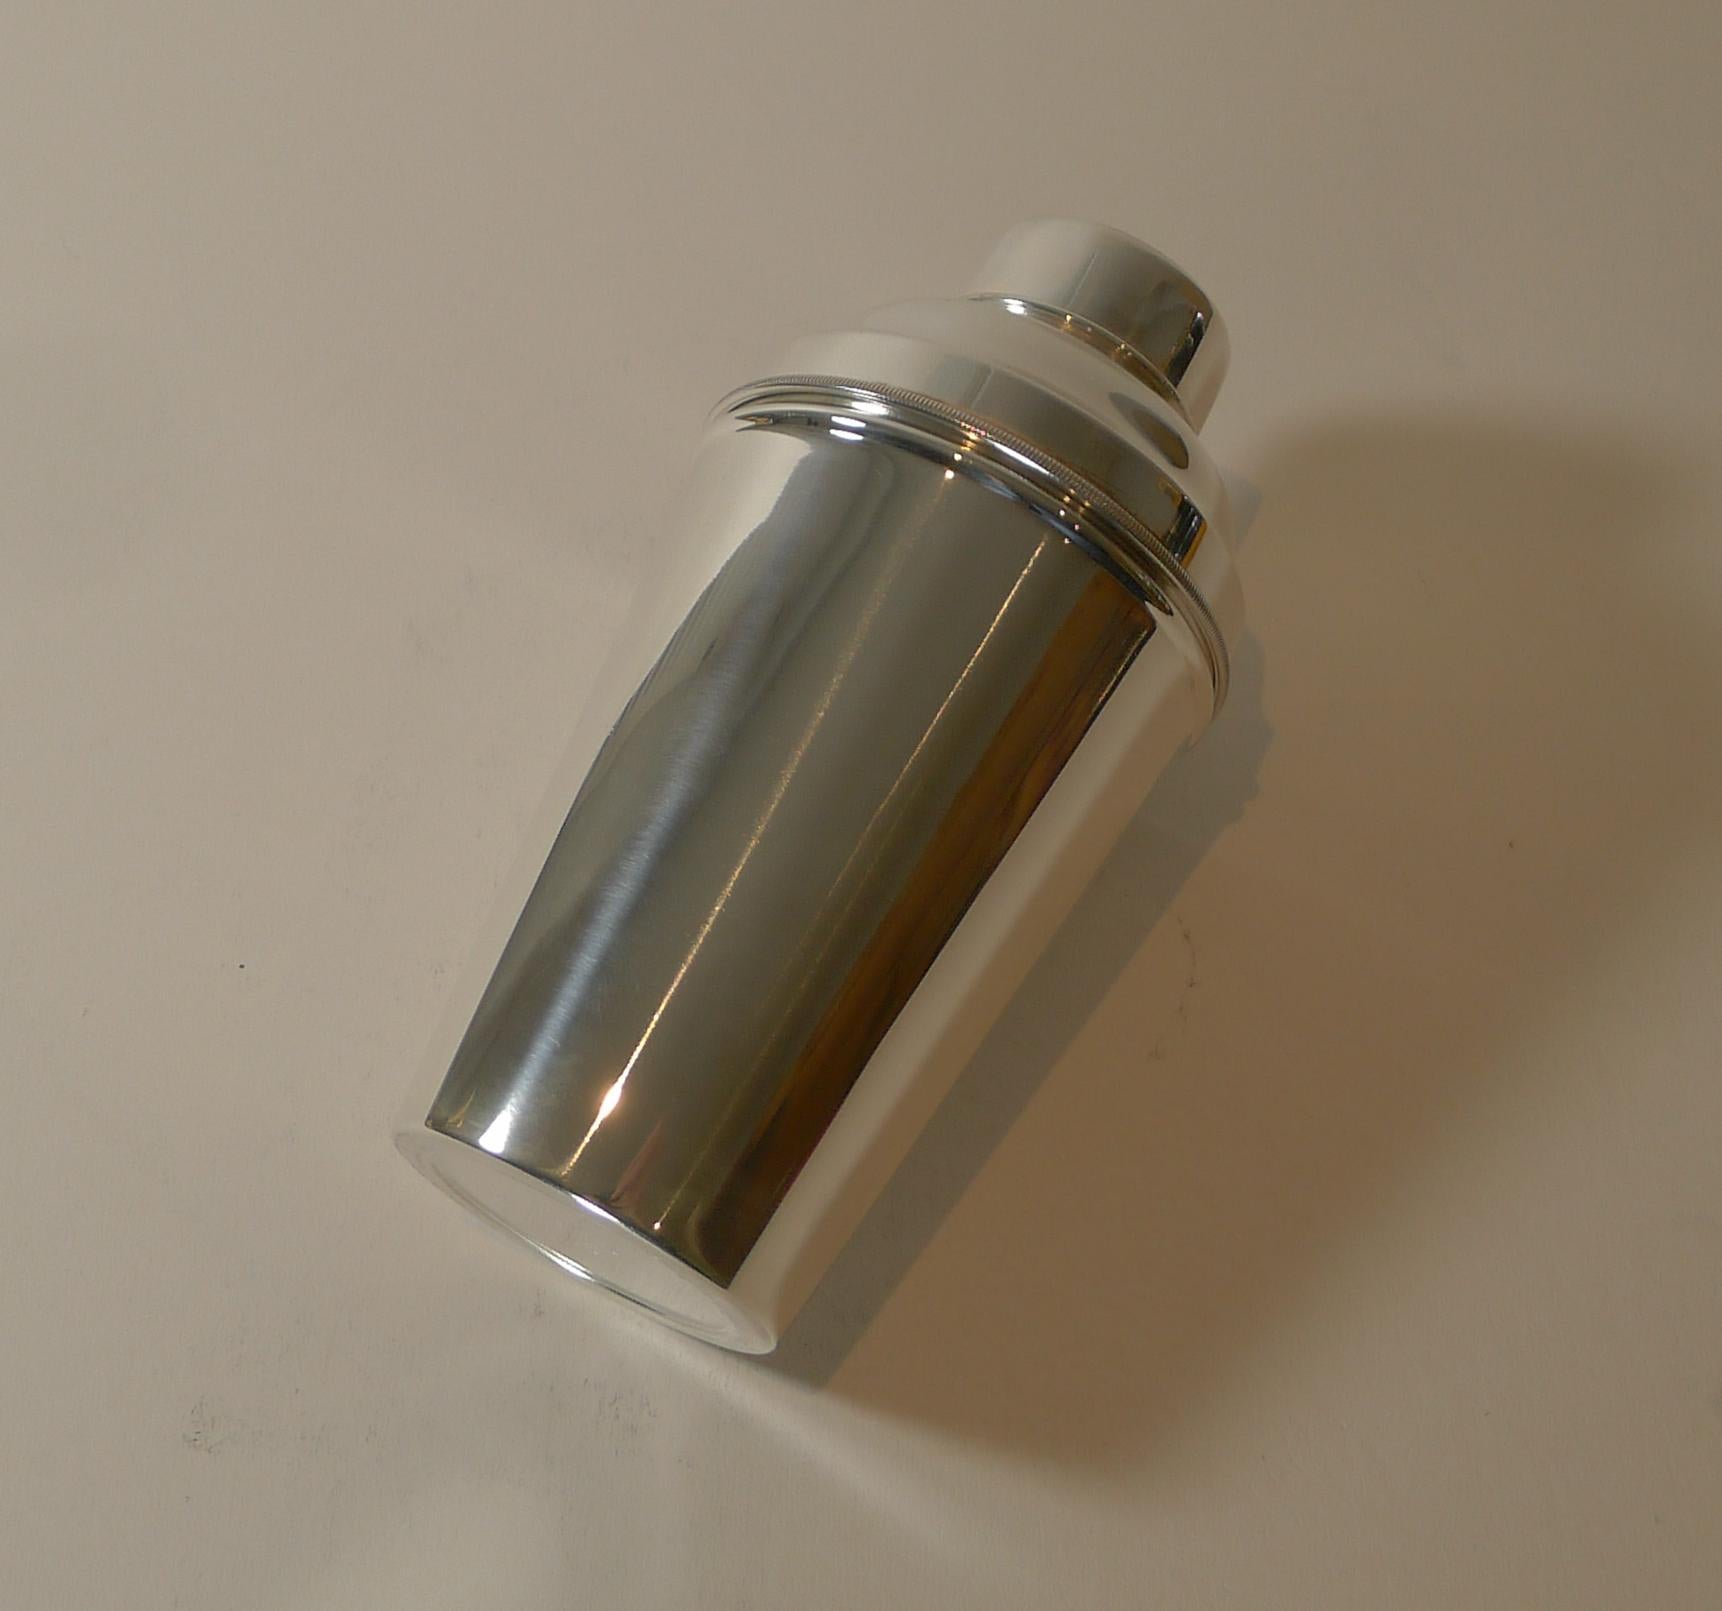 Art Deco Large 1 1/2 Pint Silver Plated Cocktail Shaker by Suckling Ltd. c.1930